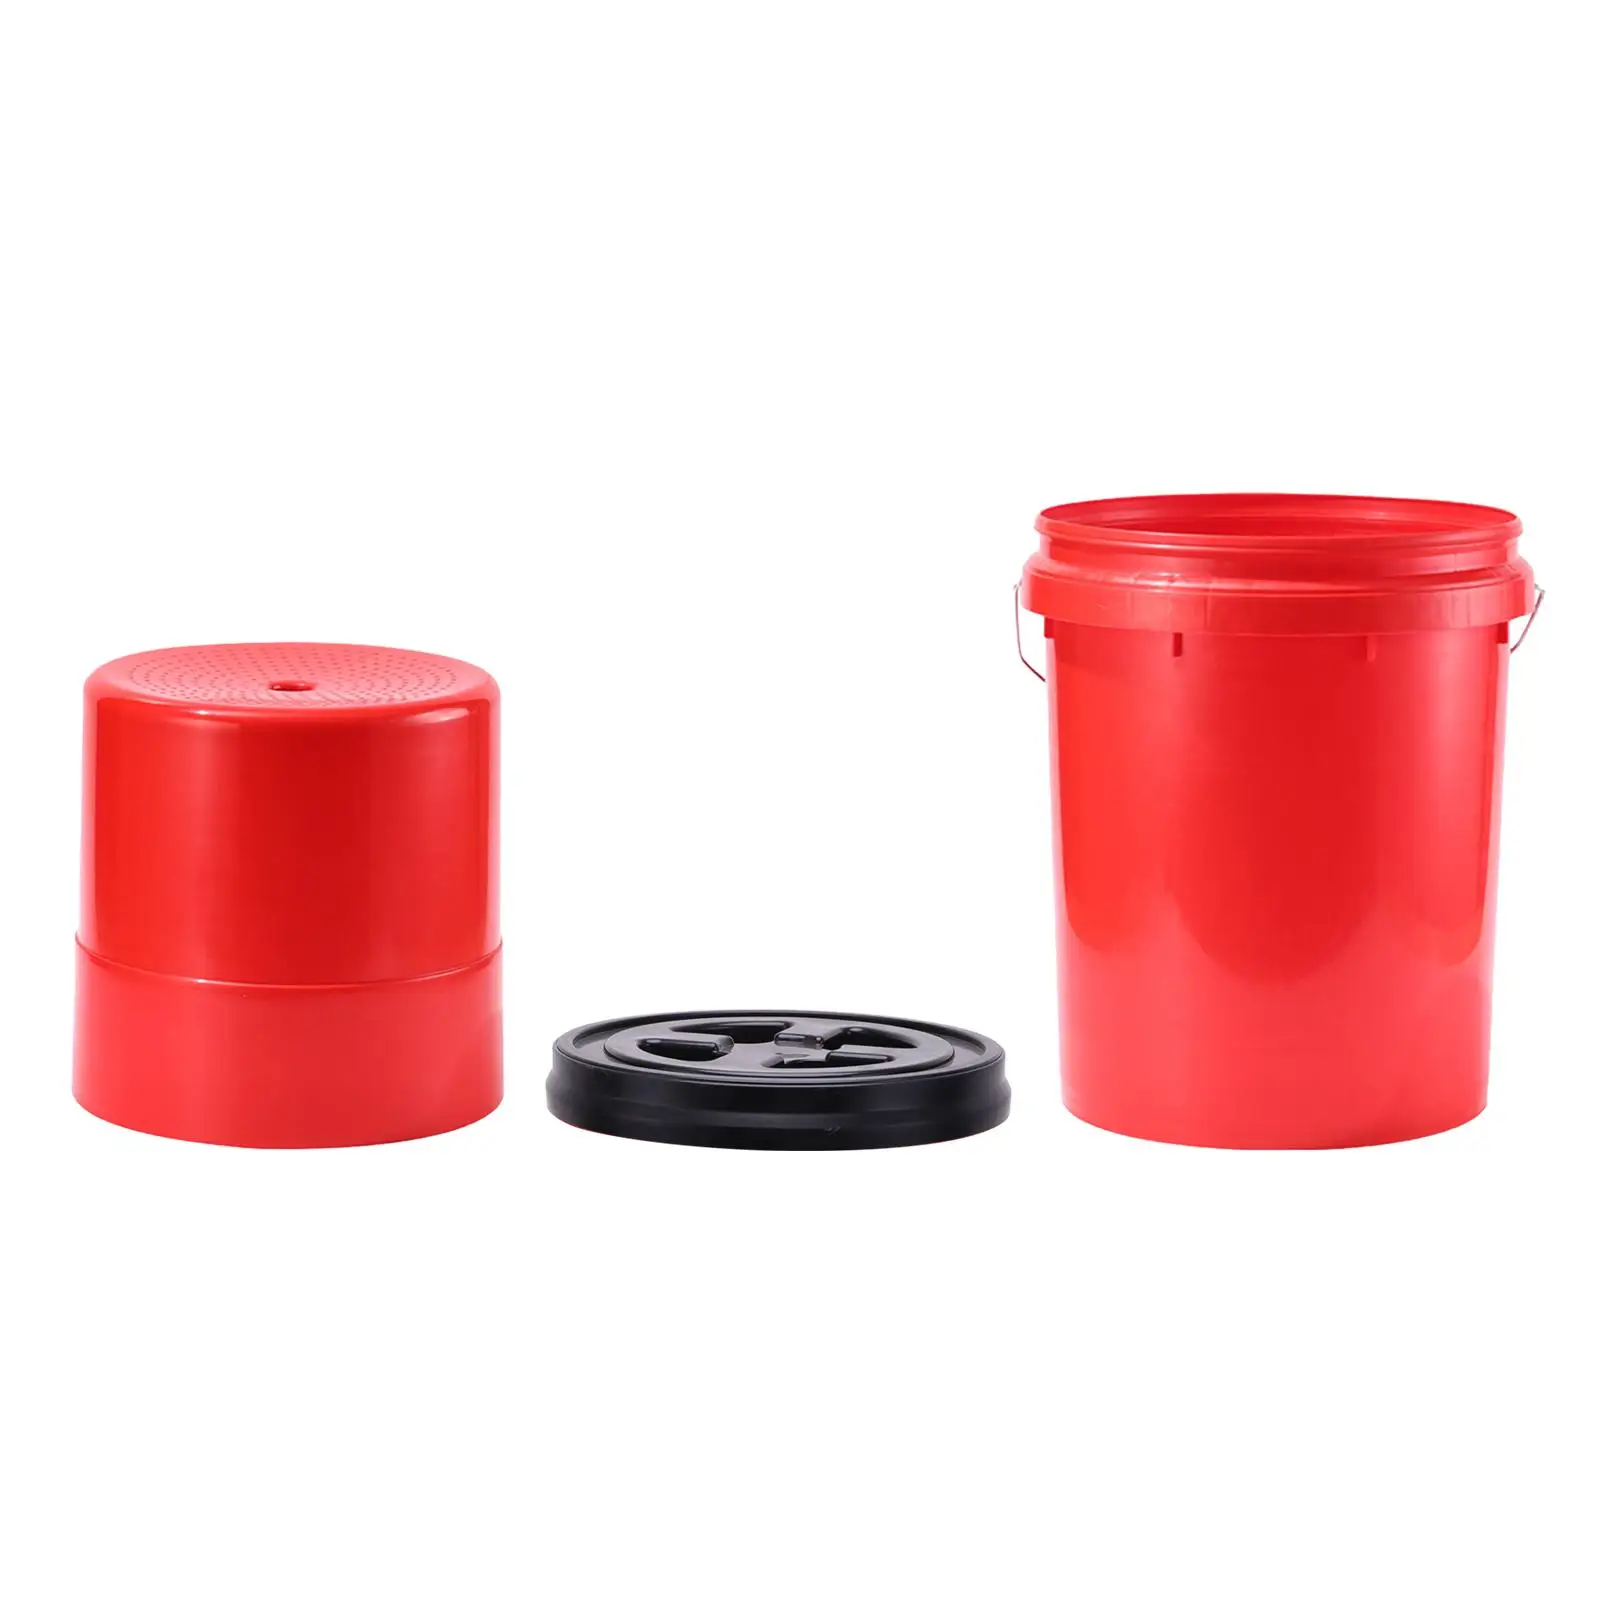 Automotive Washing Accessories Bucket Insert Lid Easy to Push Detachable Convenient Bucket Chair for Car Washing Detailing